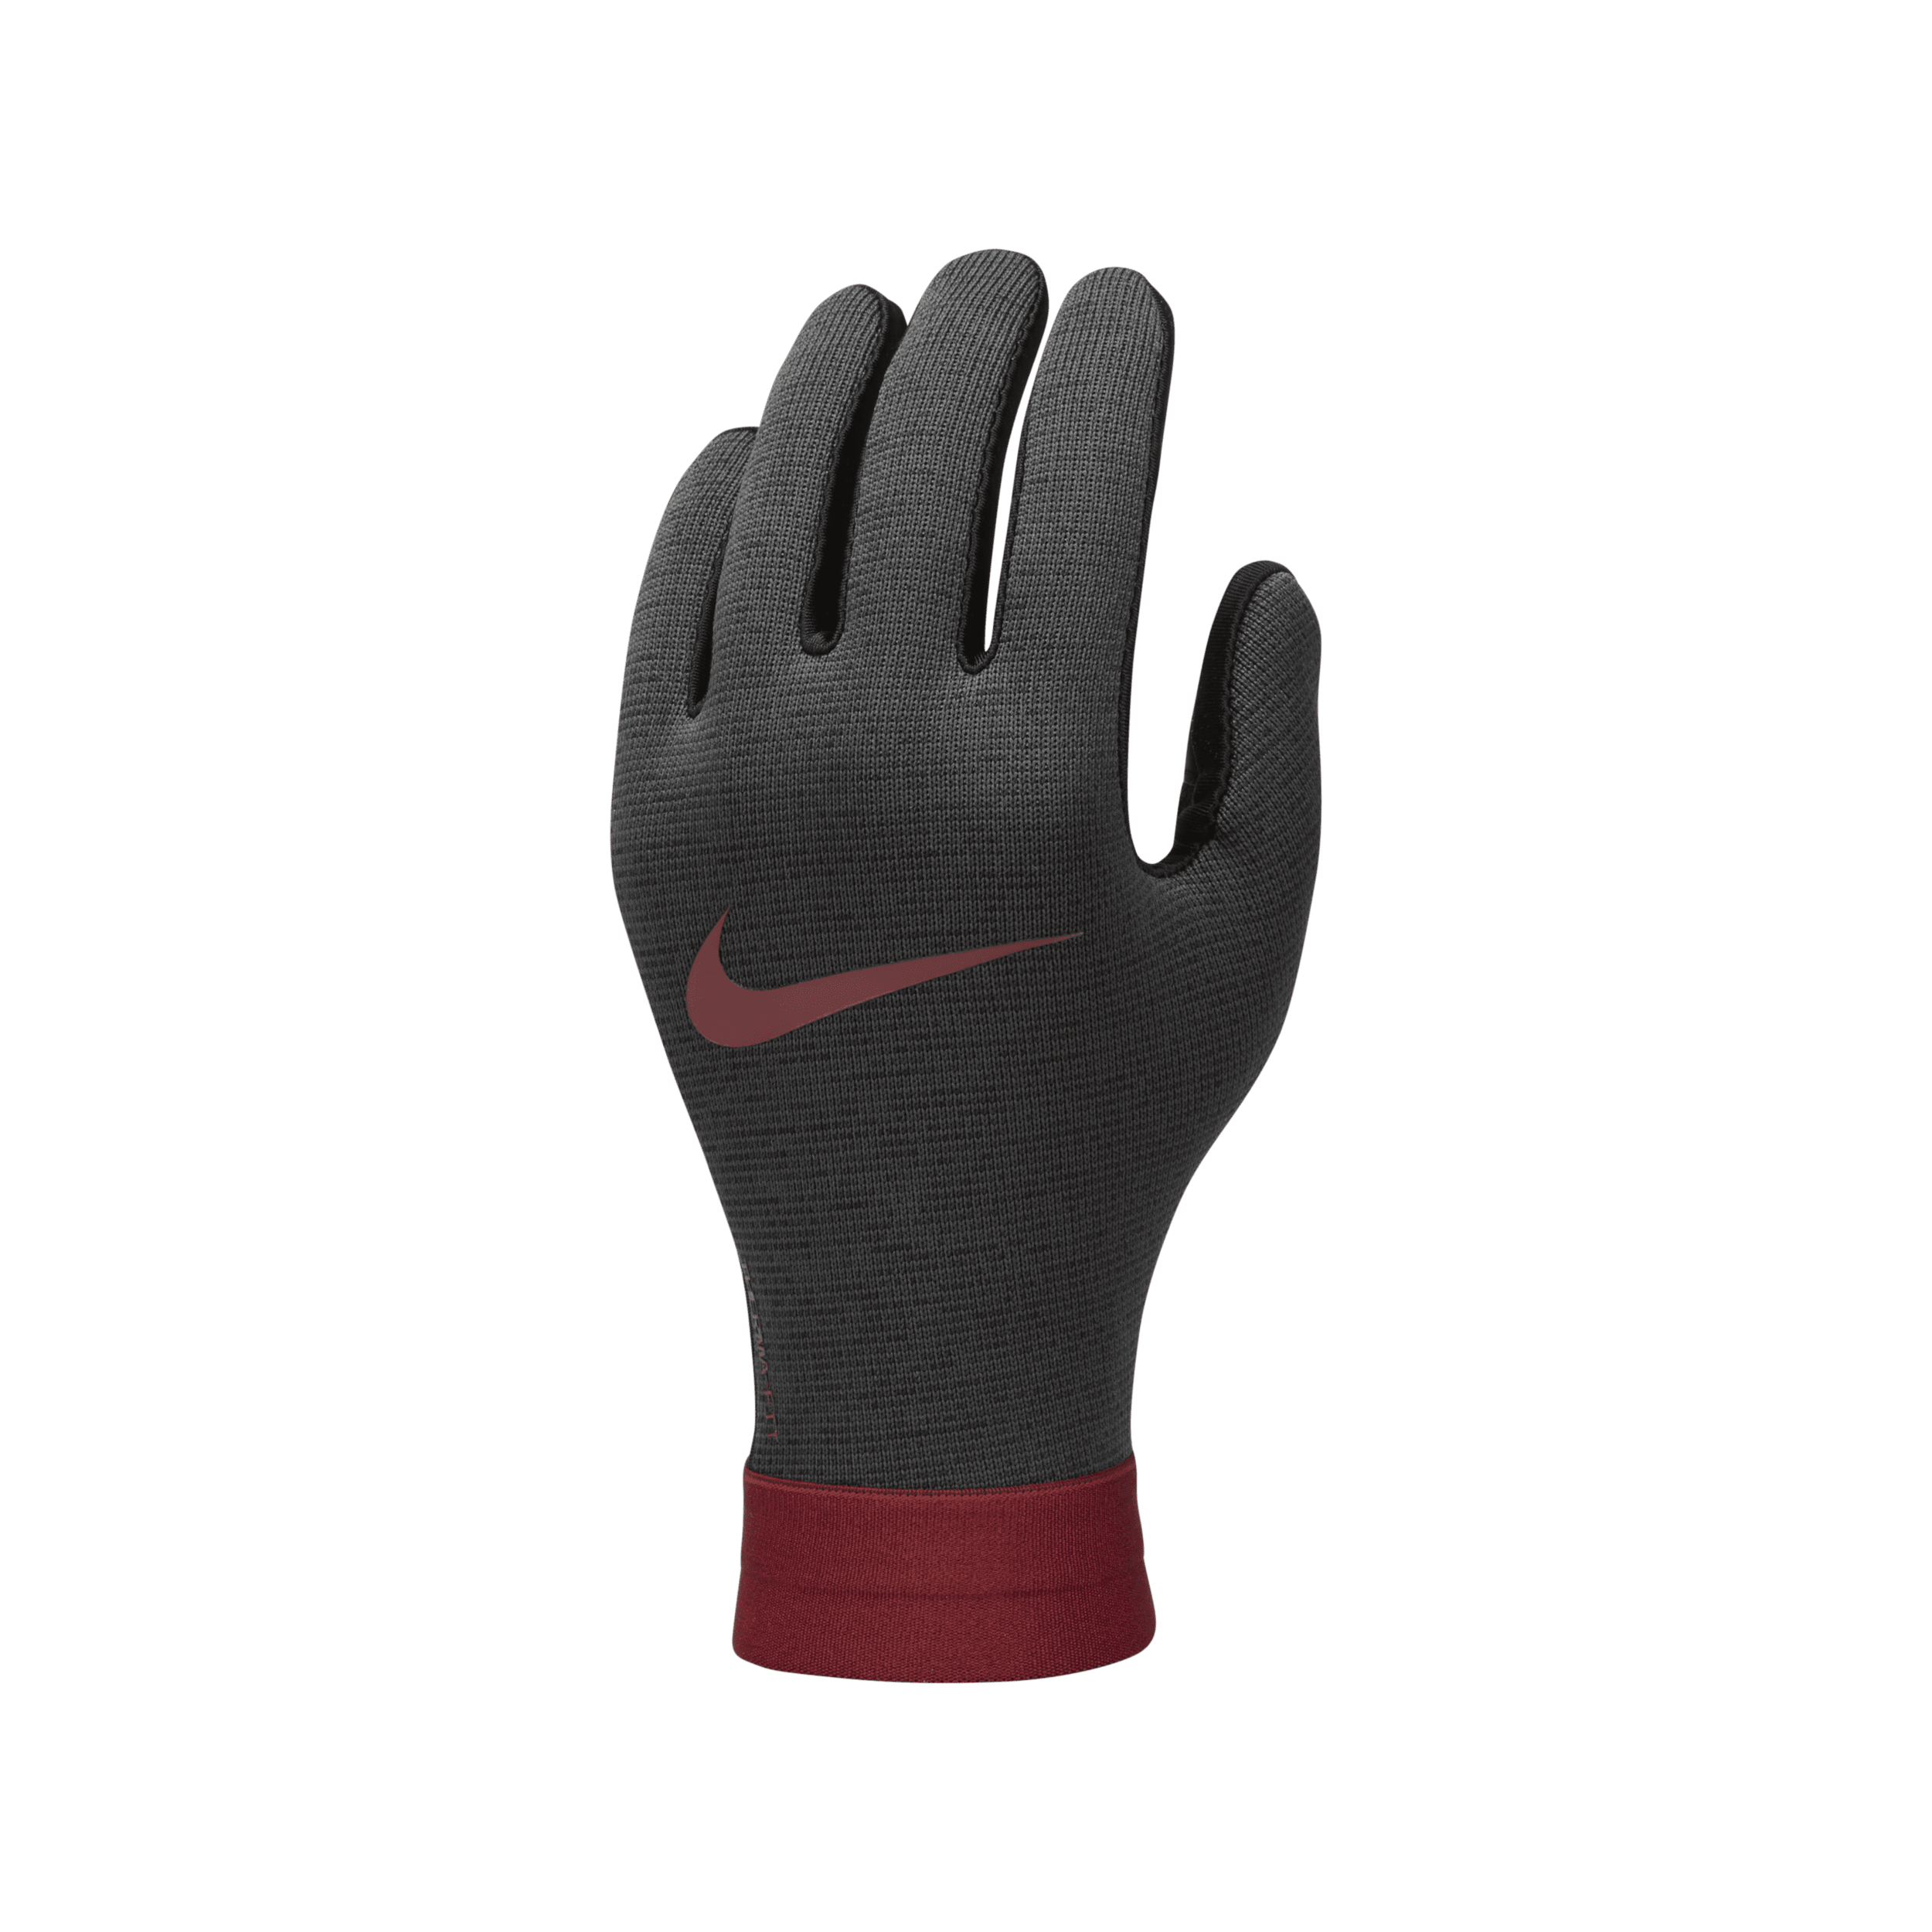 Liverpool FC Academy Guantes de fútbol Nike Therma-FIT - Niño/a - Negro